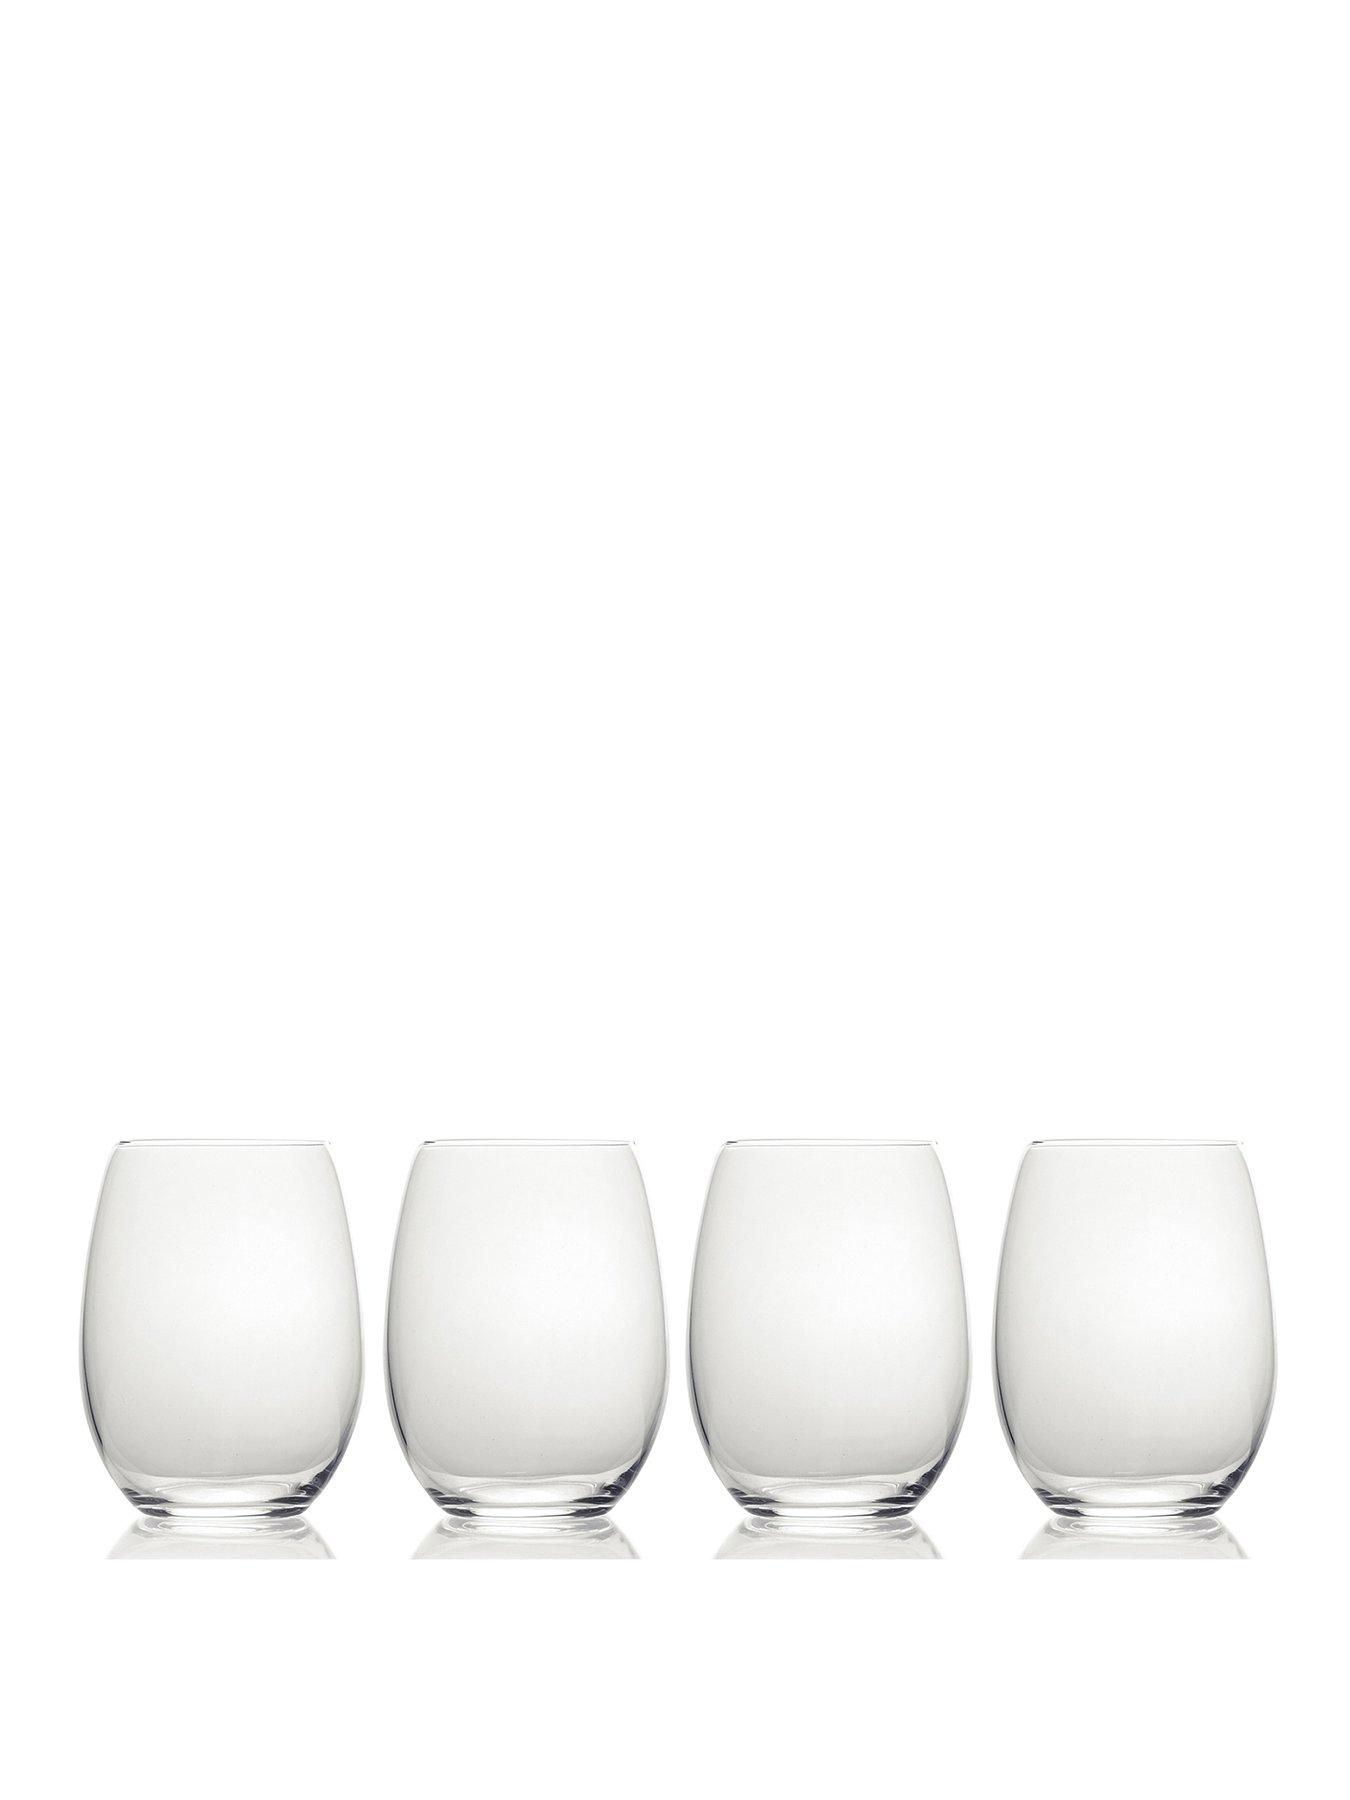 Opulent Angled Coupe Cocktail Glasses, Set of 4